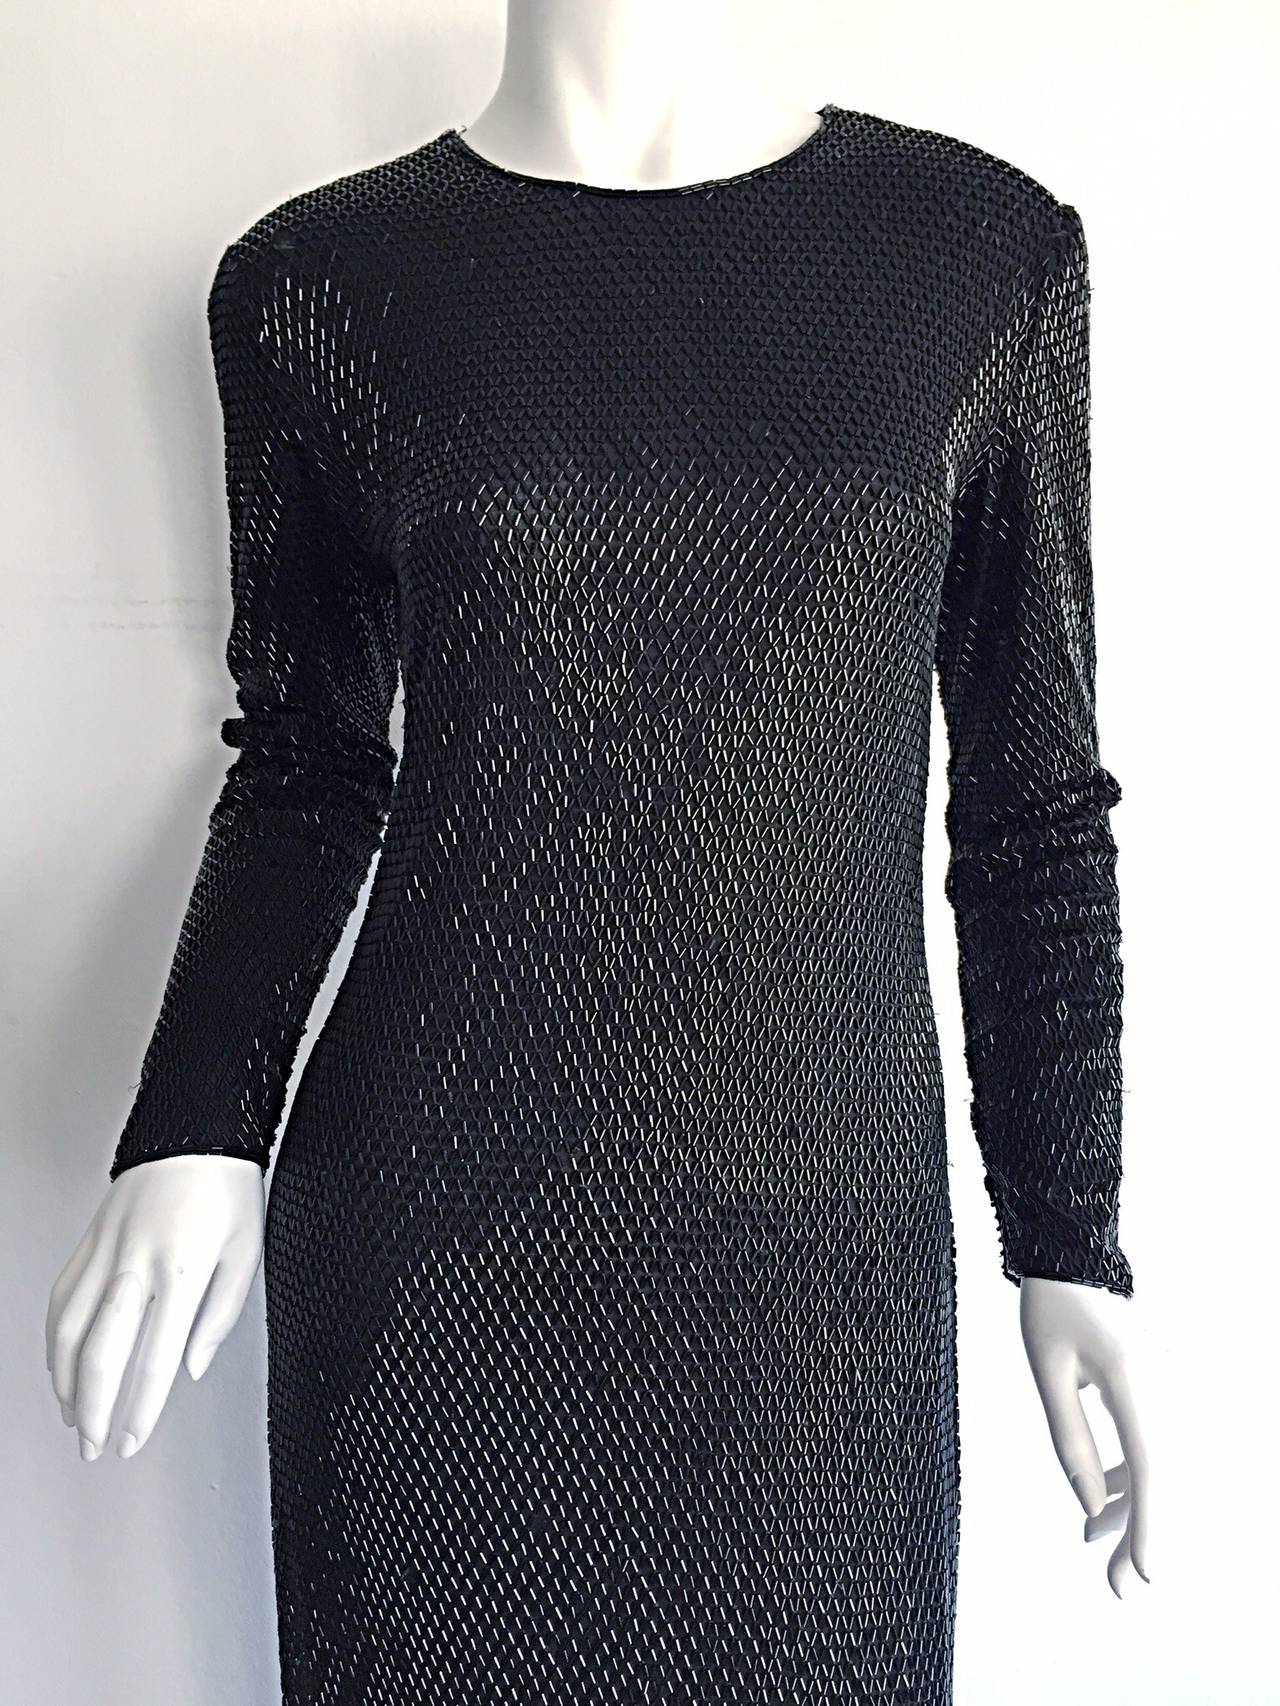 Drop dead gorgeous vintage Calvin Klein Collection heavily beaded black dress! 100% silk, with all over beads from head to toe. Body hugging, that flatters the body like no other. Original Runway sample that is in great condition. Fully lined. In